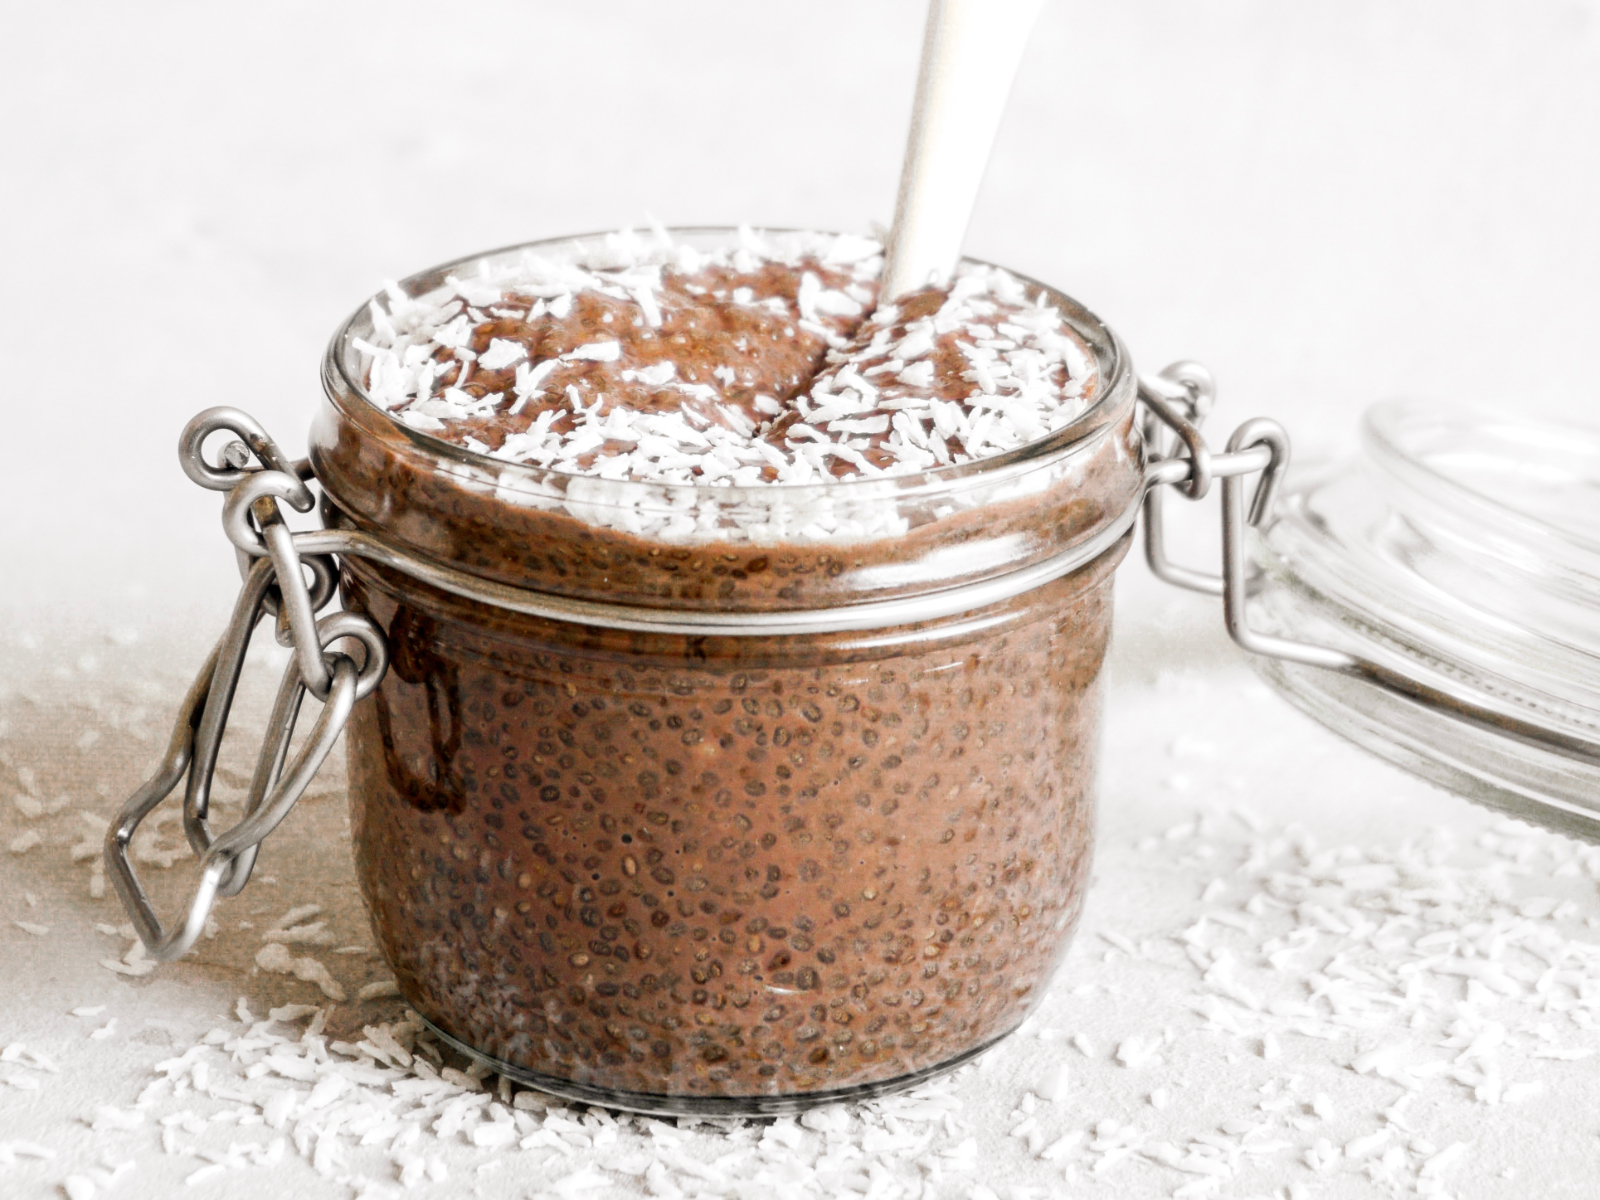 Chocolate Chia Pudding with coconut on top